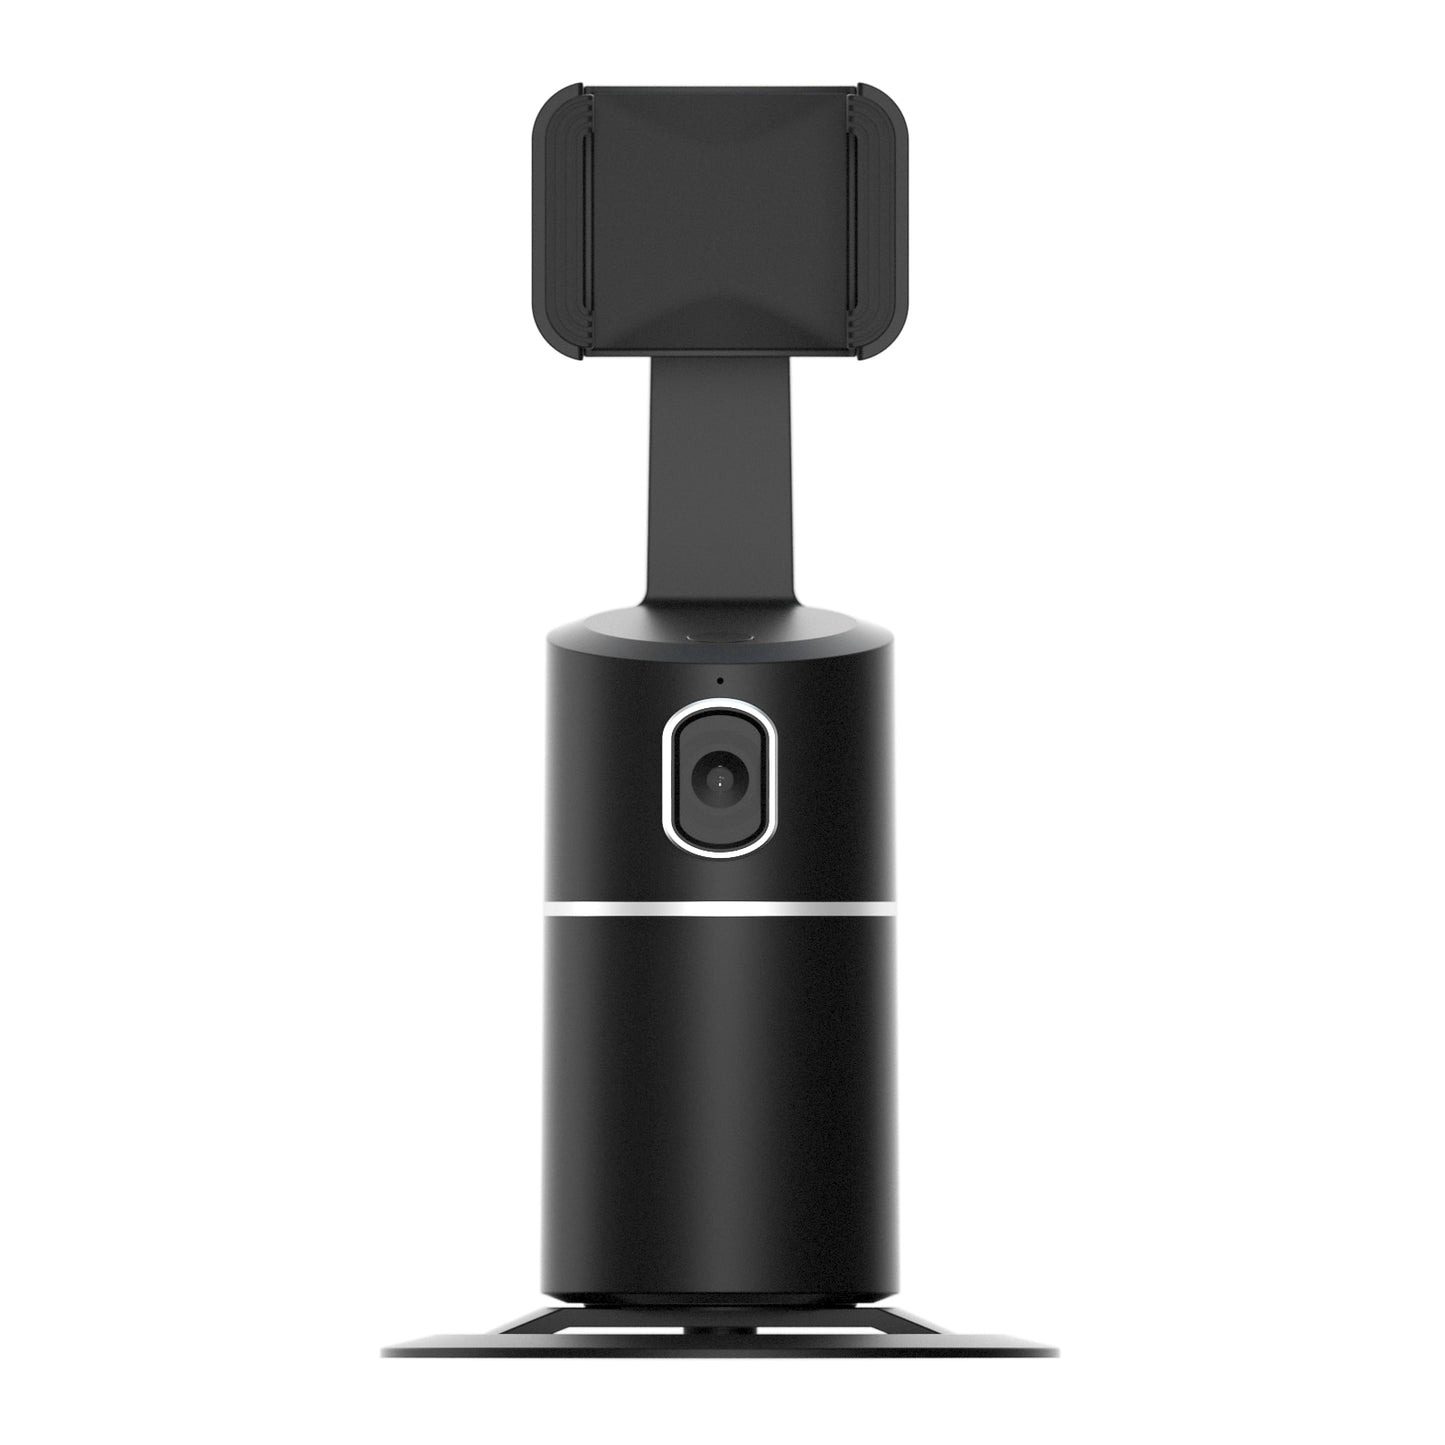 Timo Products™ Smart Shooting Selfie Stick 360